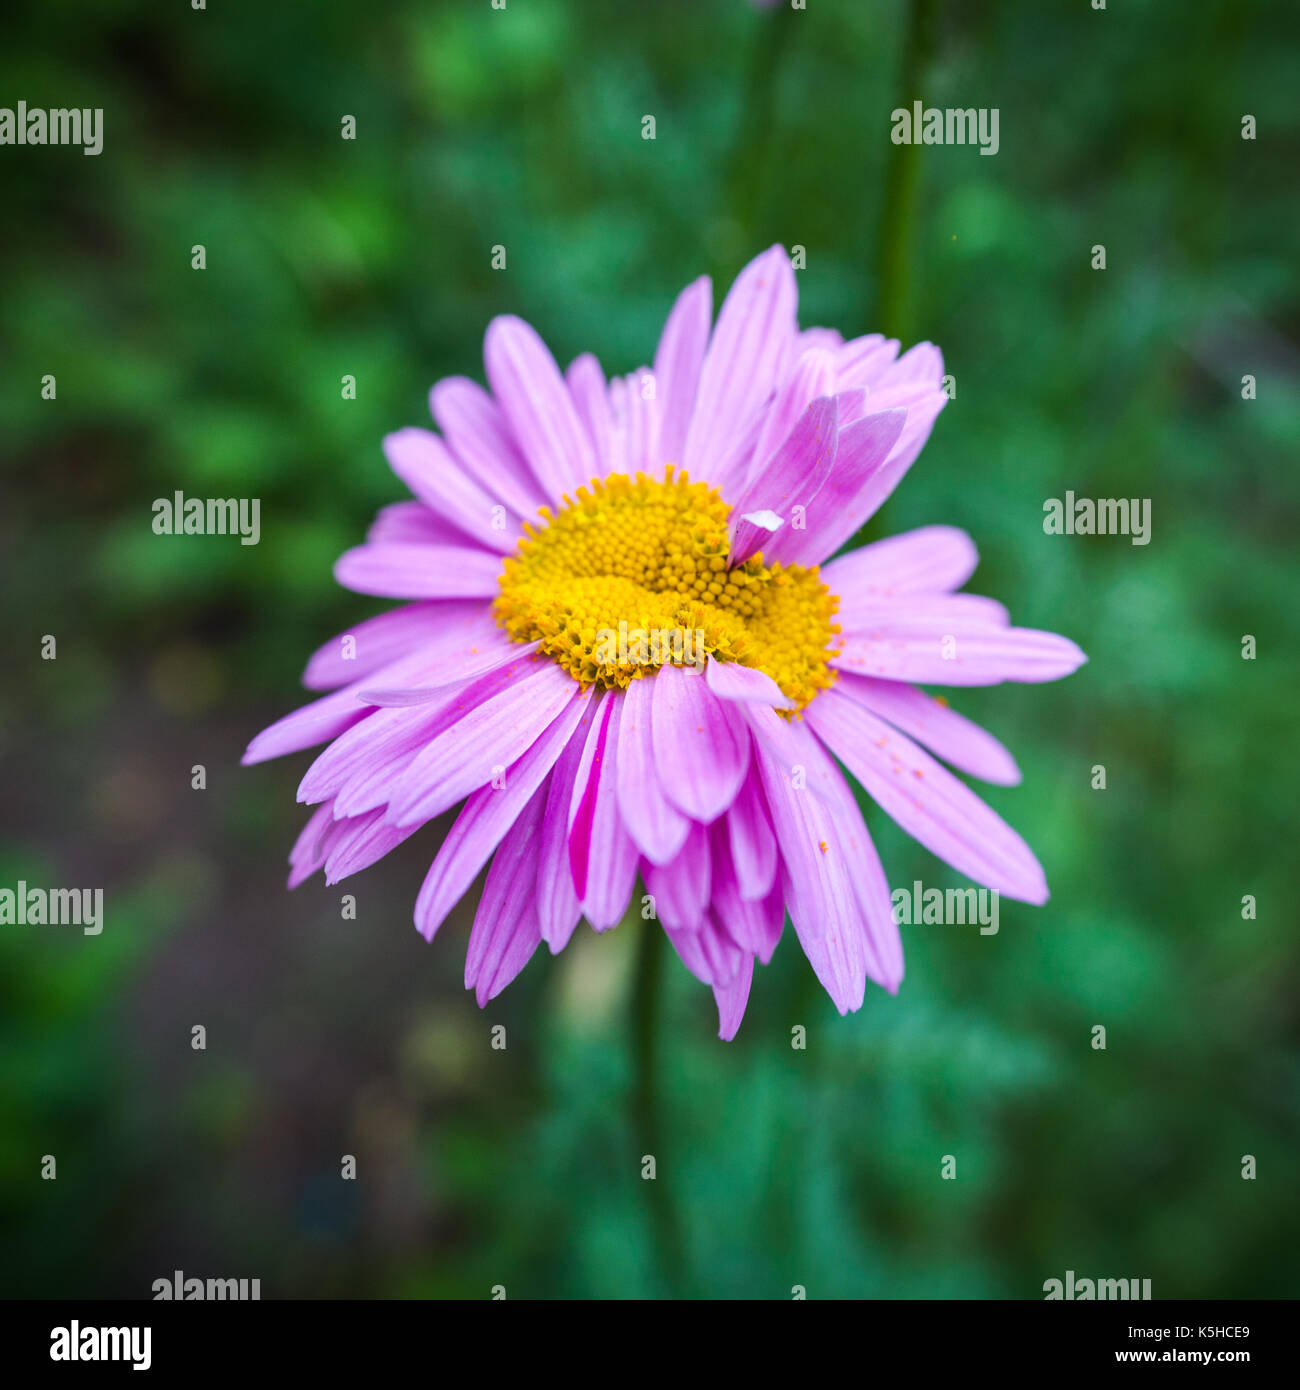 Abnormal flower. Double headed pink daisy. Natural blurred background. Stock Photo